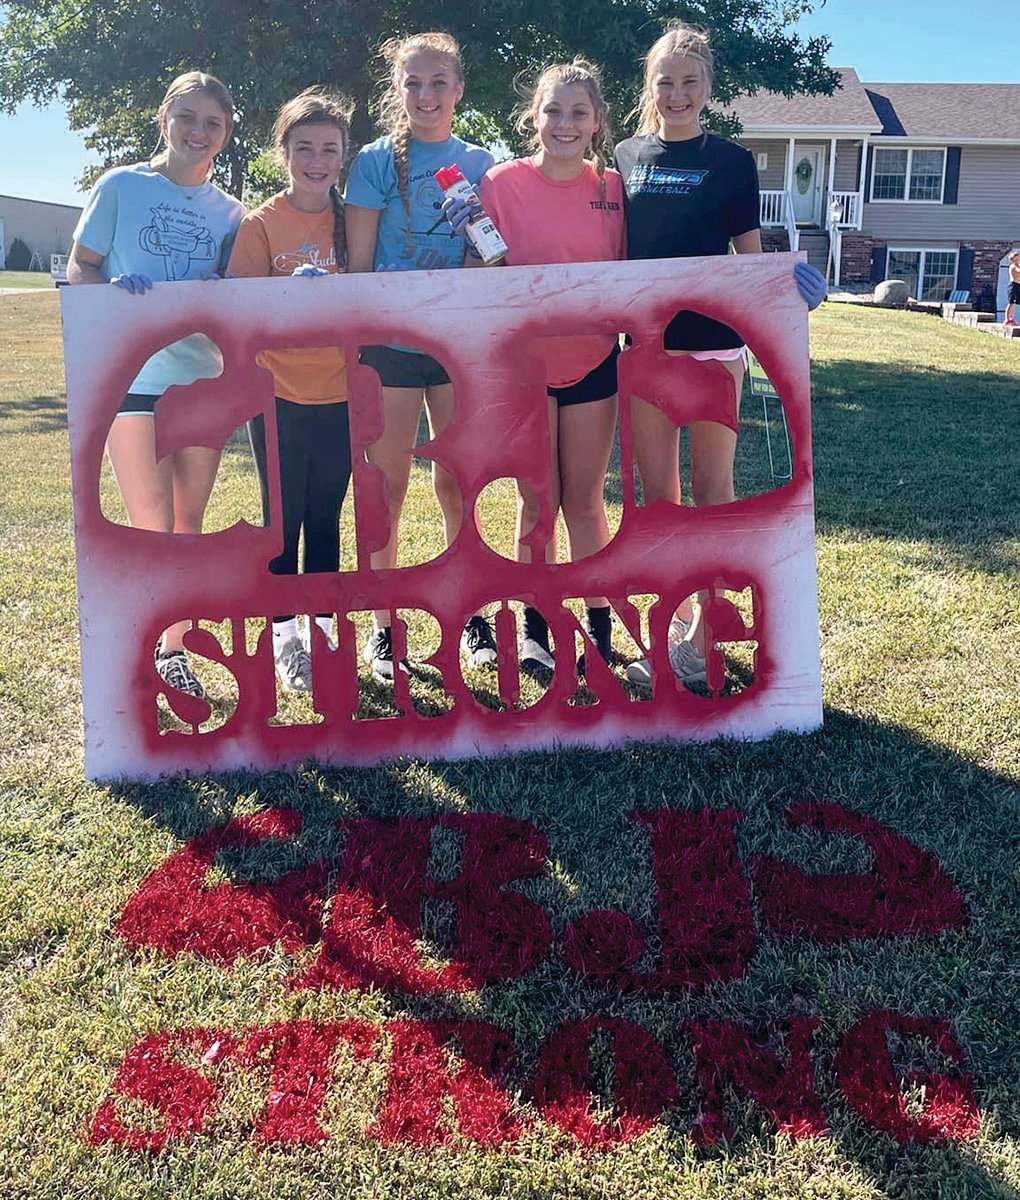 Elli Dudenhoeffer, Anna Peters, Heslie Higginbotham, Brynlee Ferguson, and Paige Senevey paint a yard stencil with the logo, “BJ Strong” recently with help from Jason Dudenhoeffer.